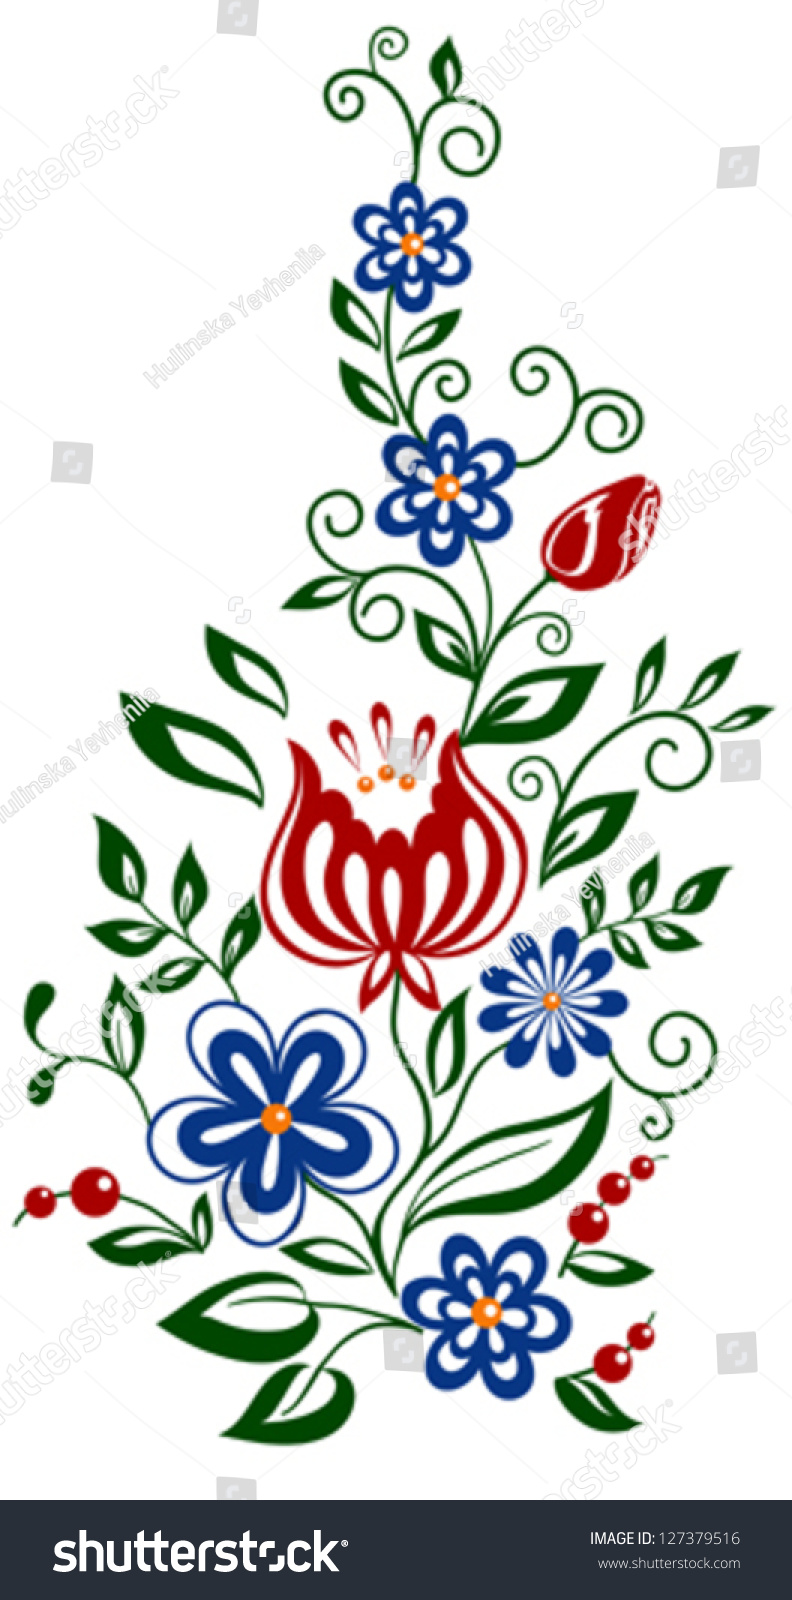 Beautiful Floral Element Flowers And Leaves Design Element Many Similarities To The Author S